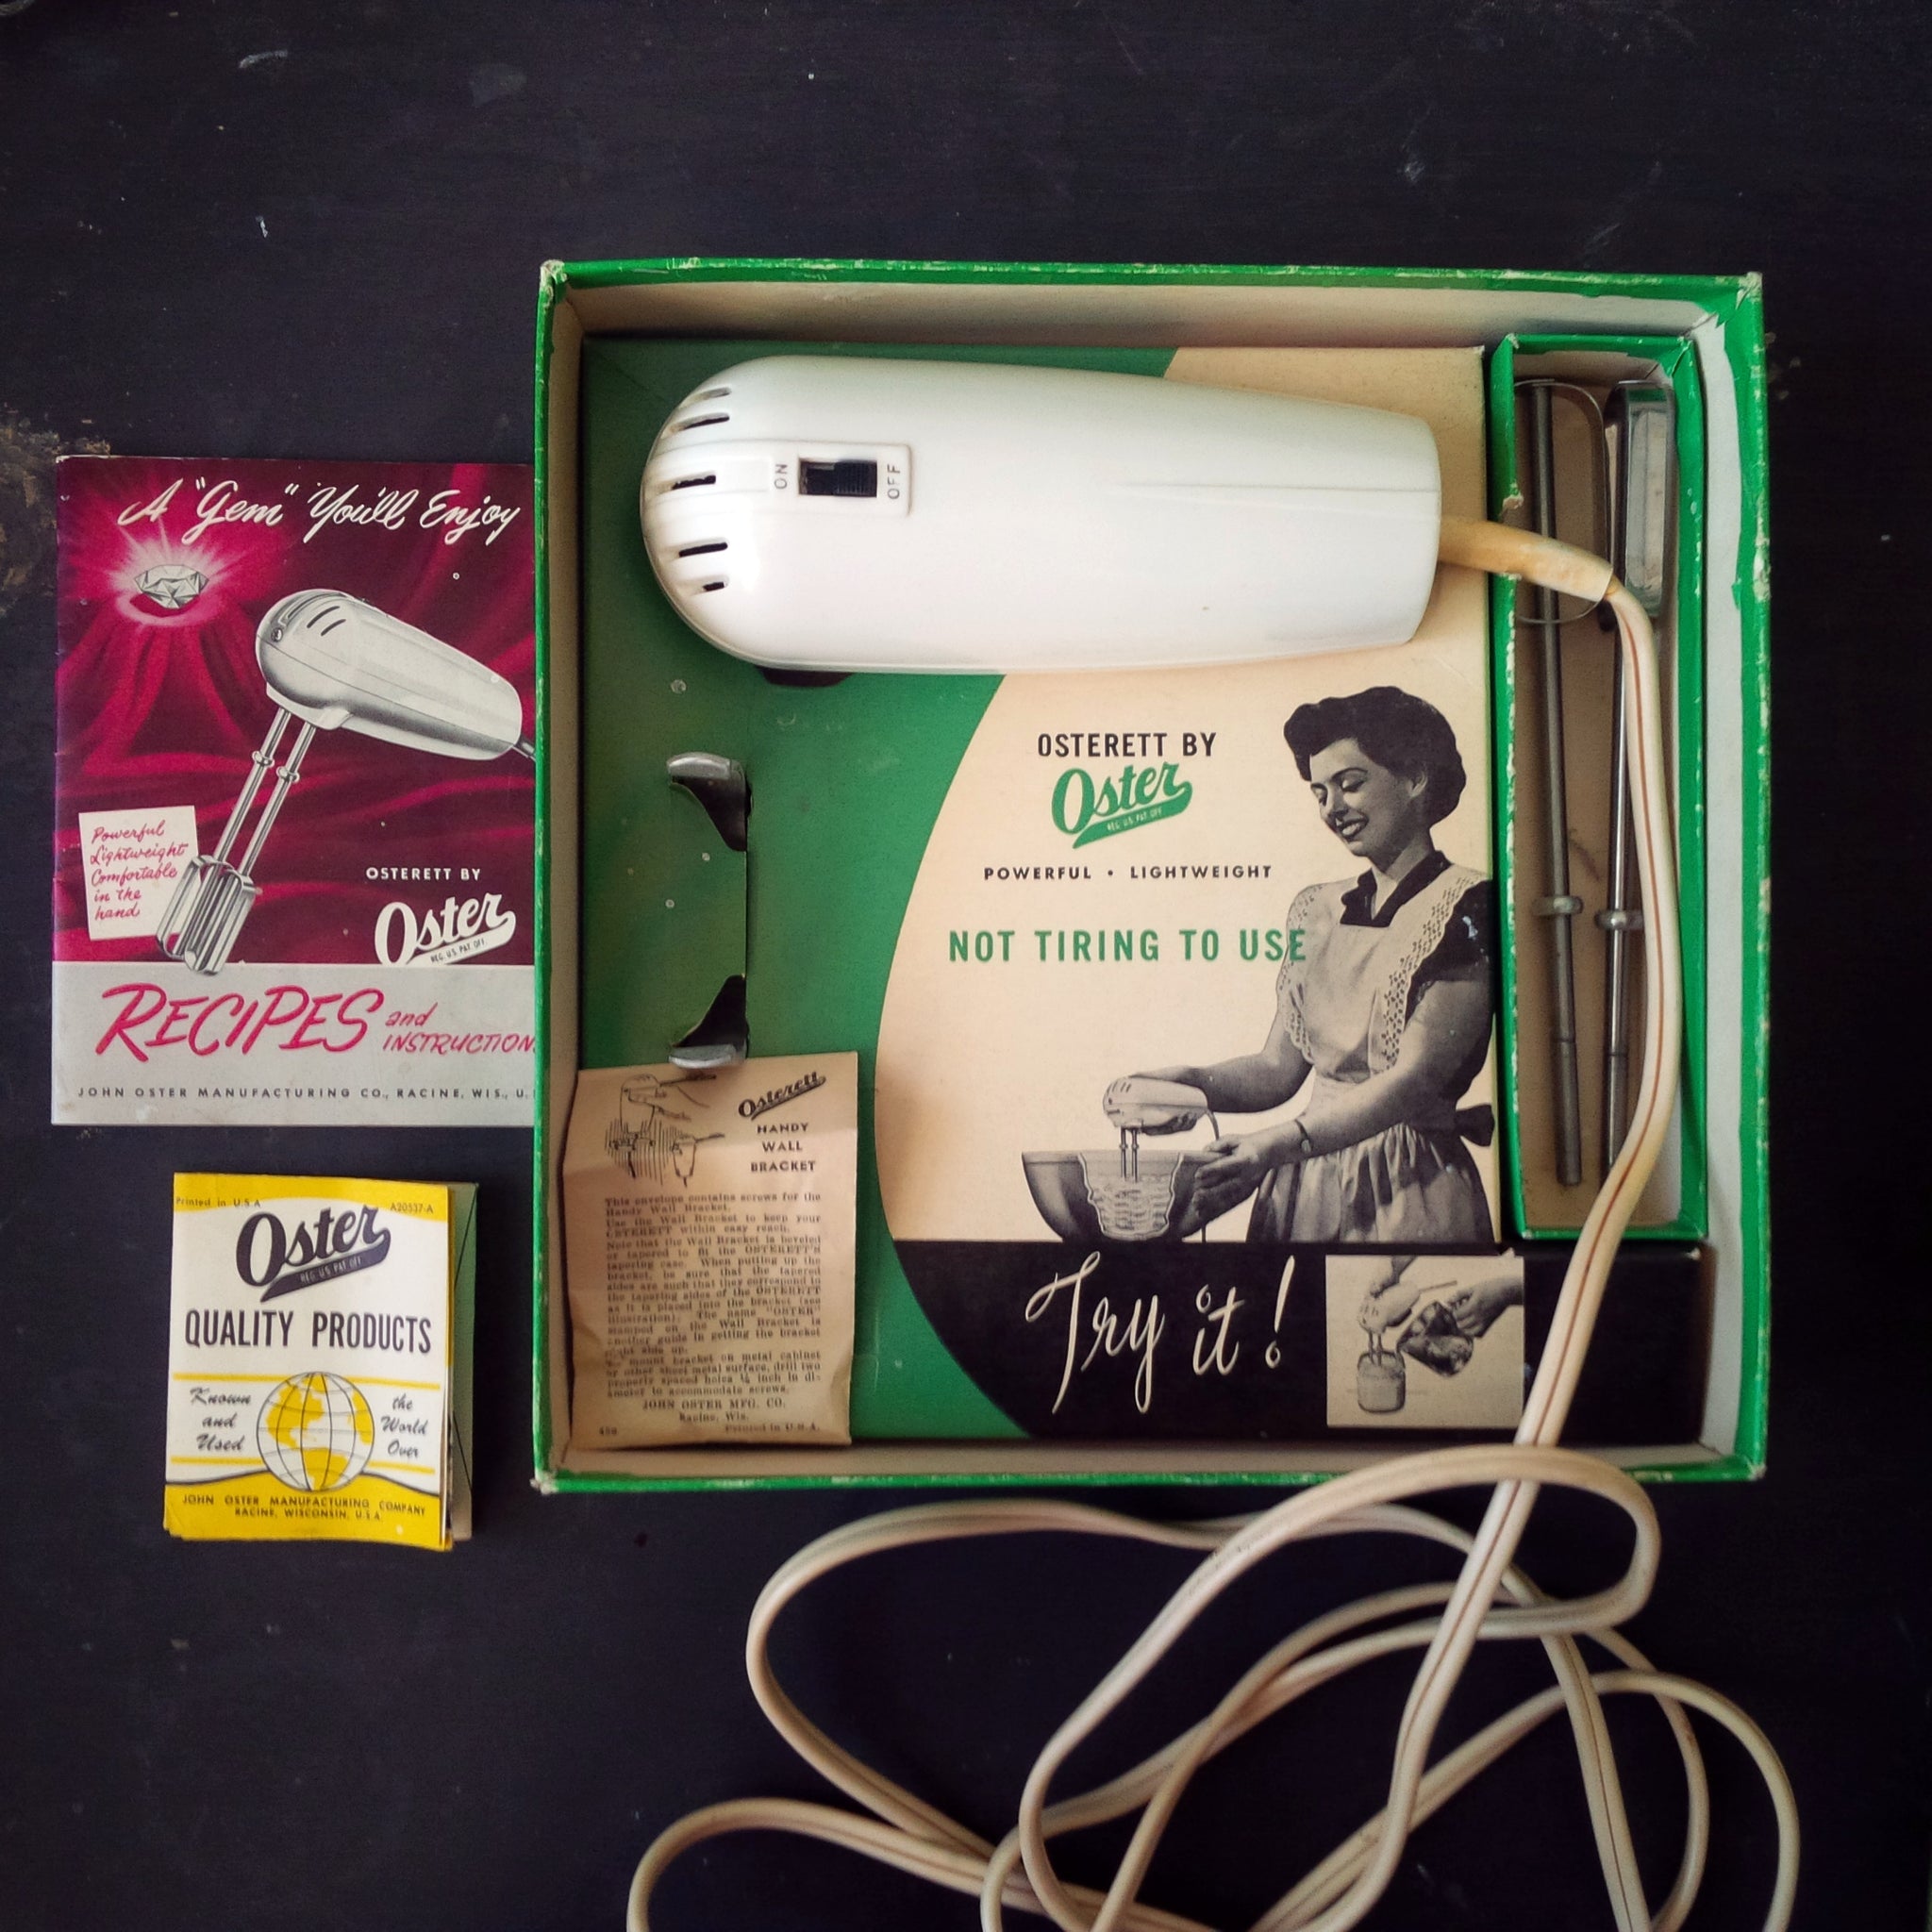 Rare Vintage 1940s Oster Mixer- Osterett Electric Hand Mixer Model 400 in Original Box - Working Condition